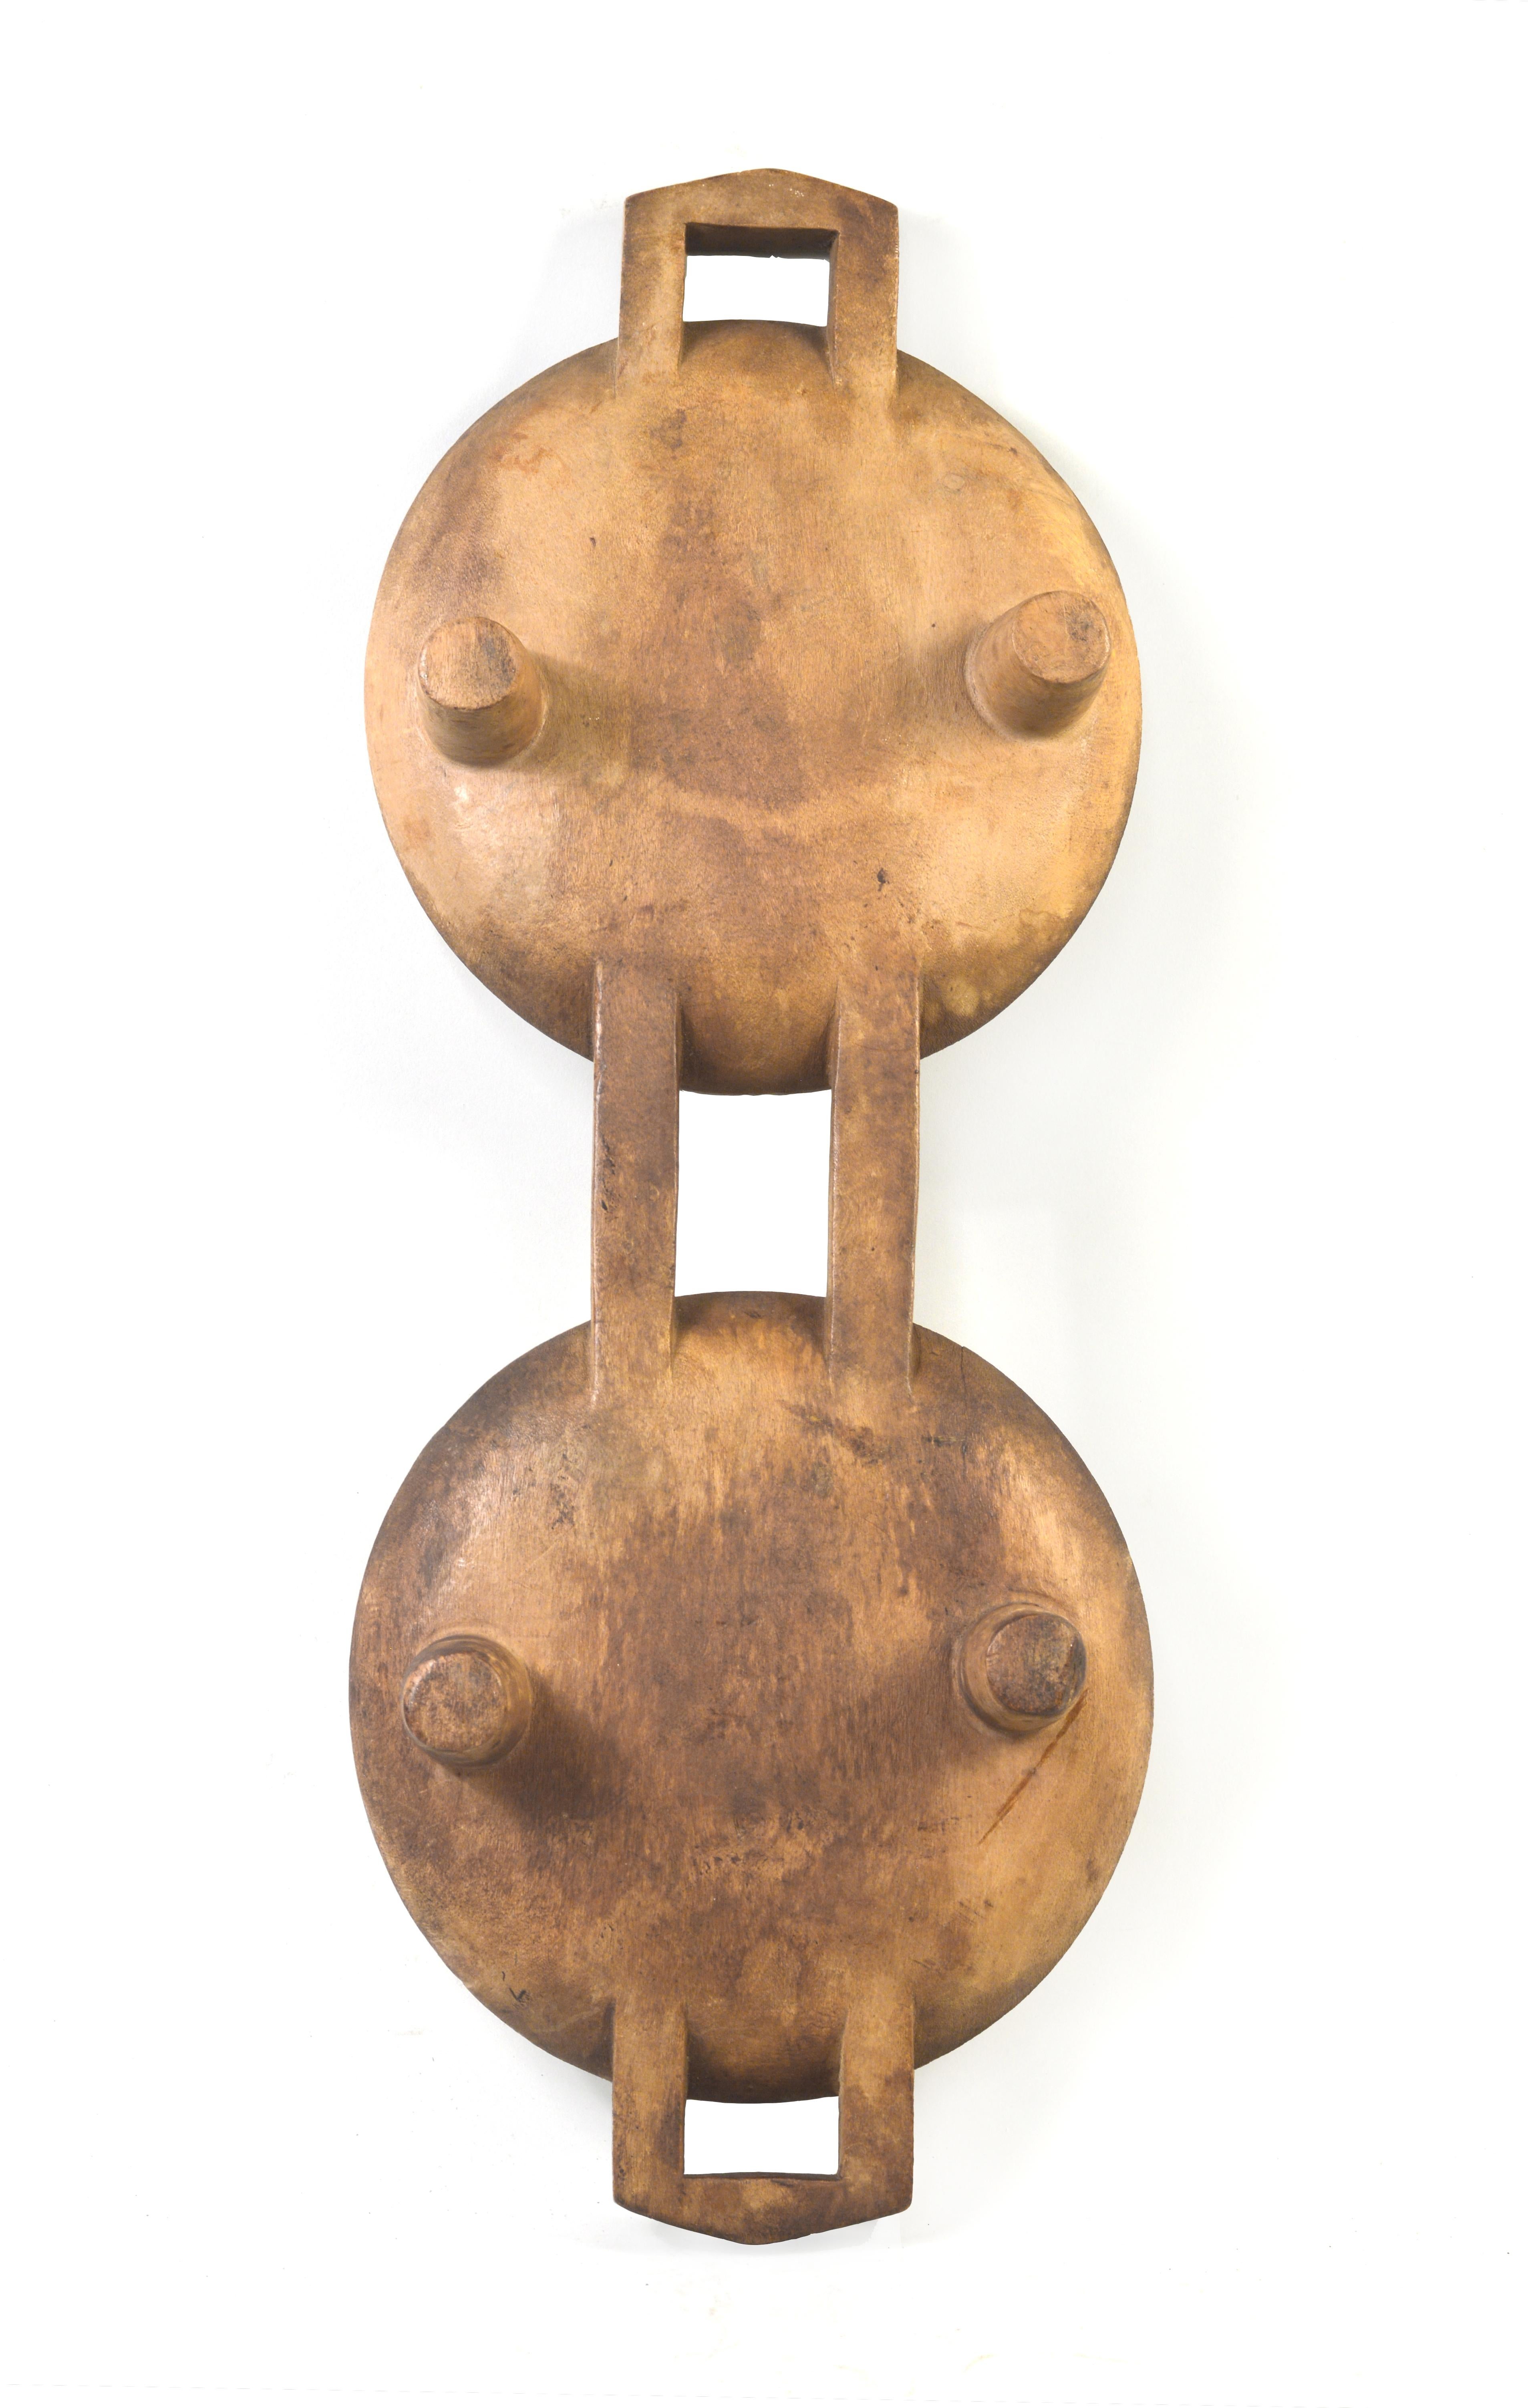 Zulu meat platters, called ugqoko in Zulu, are used at ceremonial gatherings for the carving and serving of meat from ritually-slaughtered livestock. The distinctive double platter form of this ugqoko serves as a mnemonic device that helps